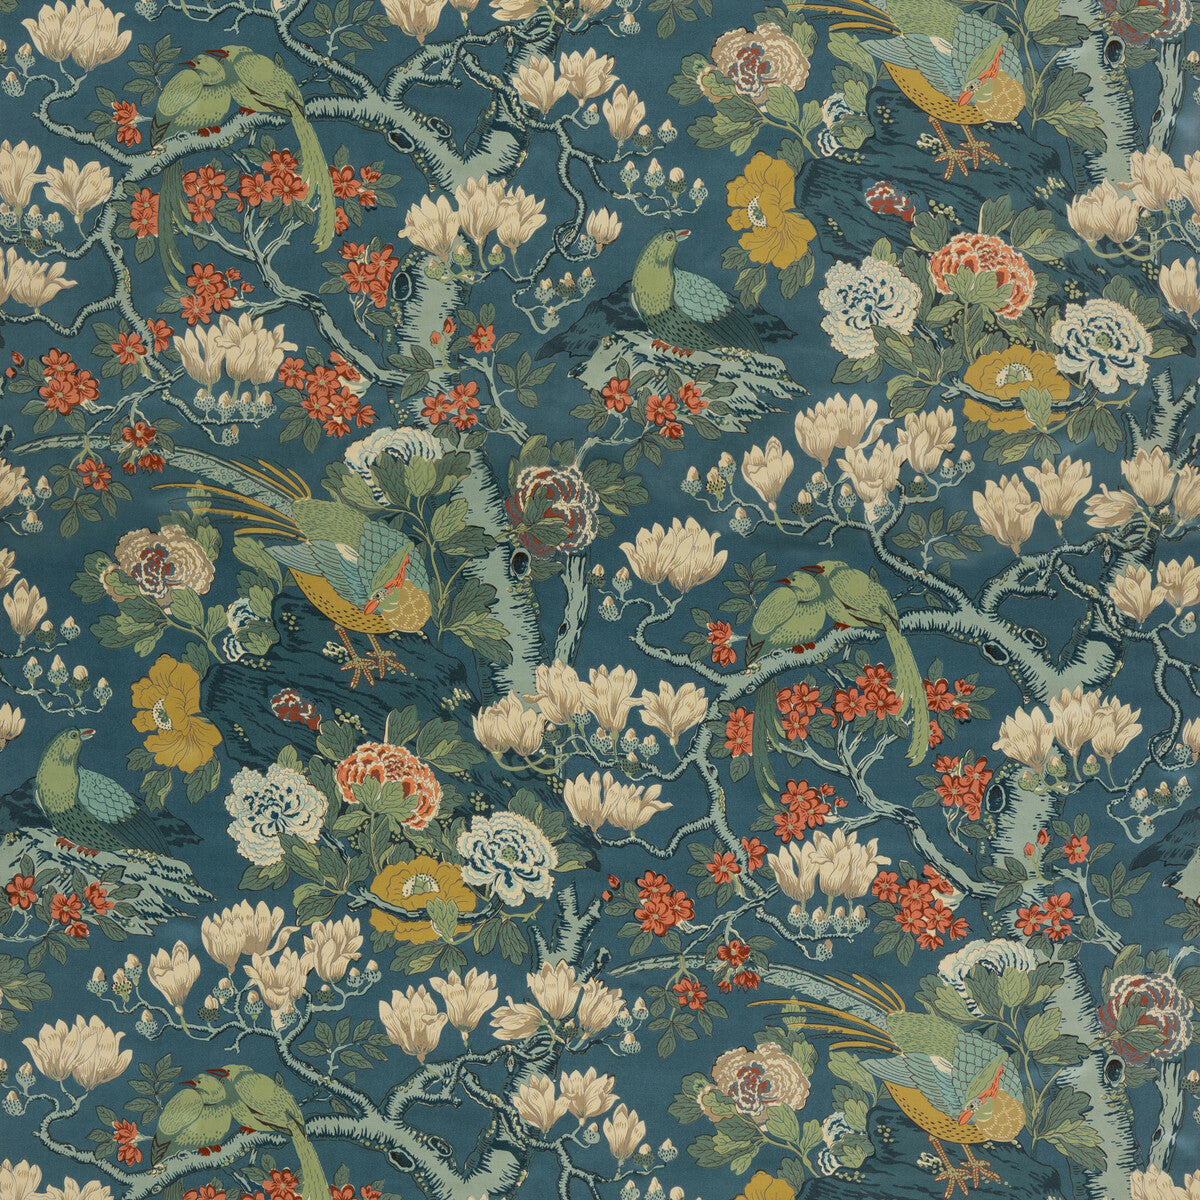 Rockbird Velvet fabric in teal color - pattern BP10815.2.0 - by G P &amp; J Baker in the Signature Velvets collection